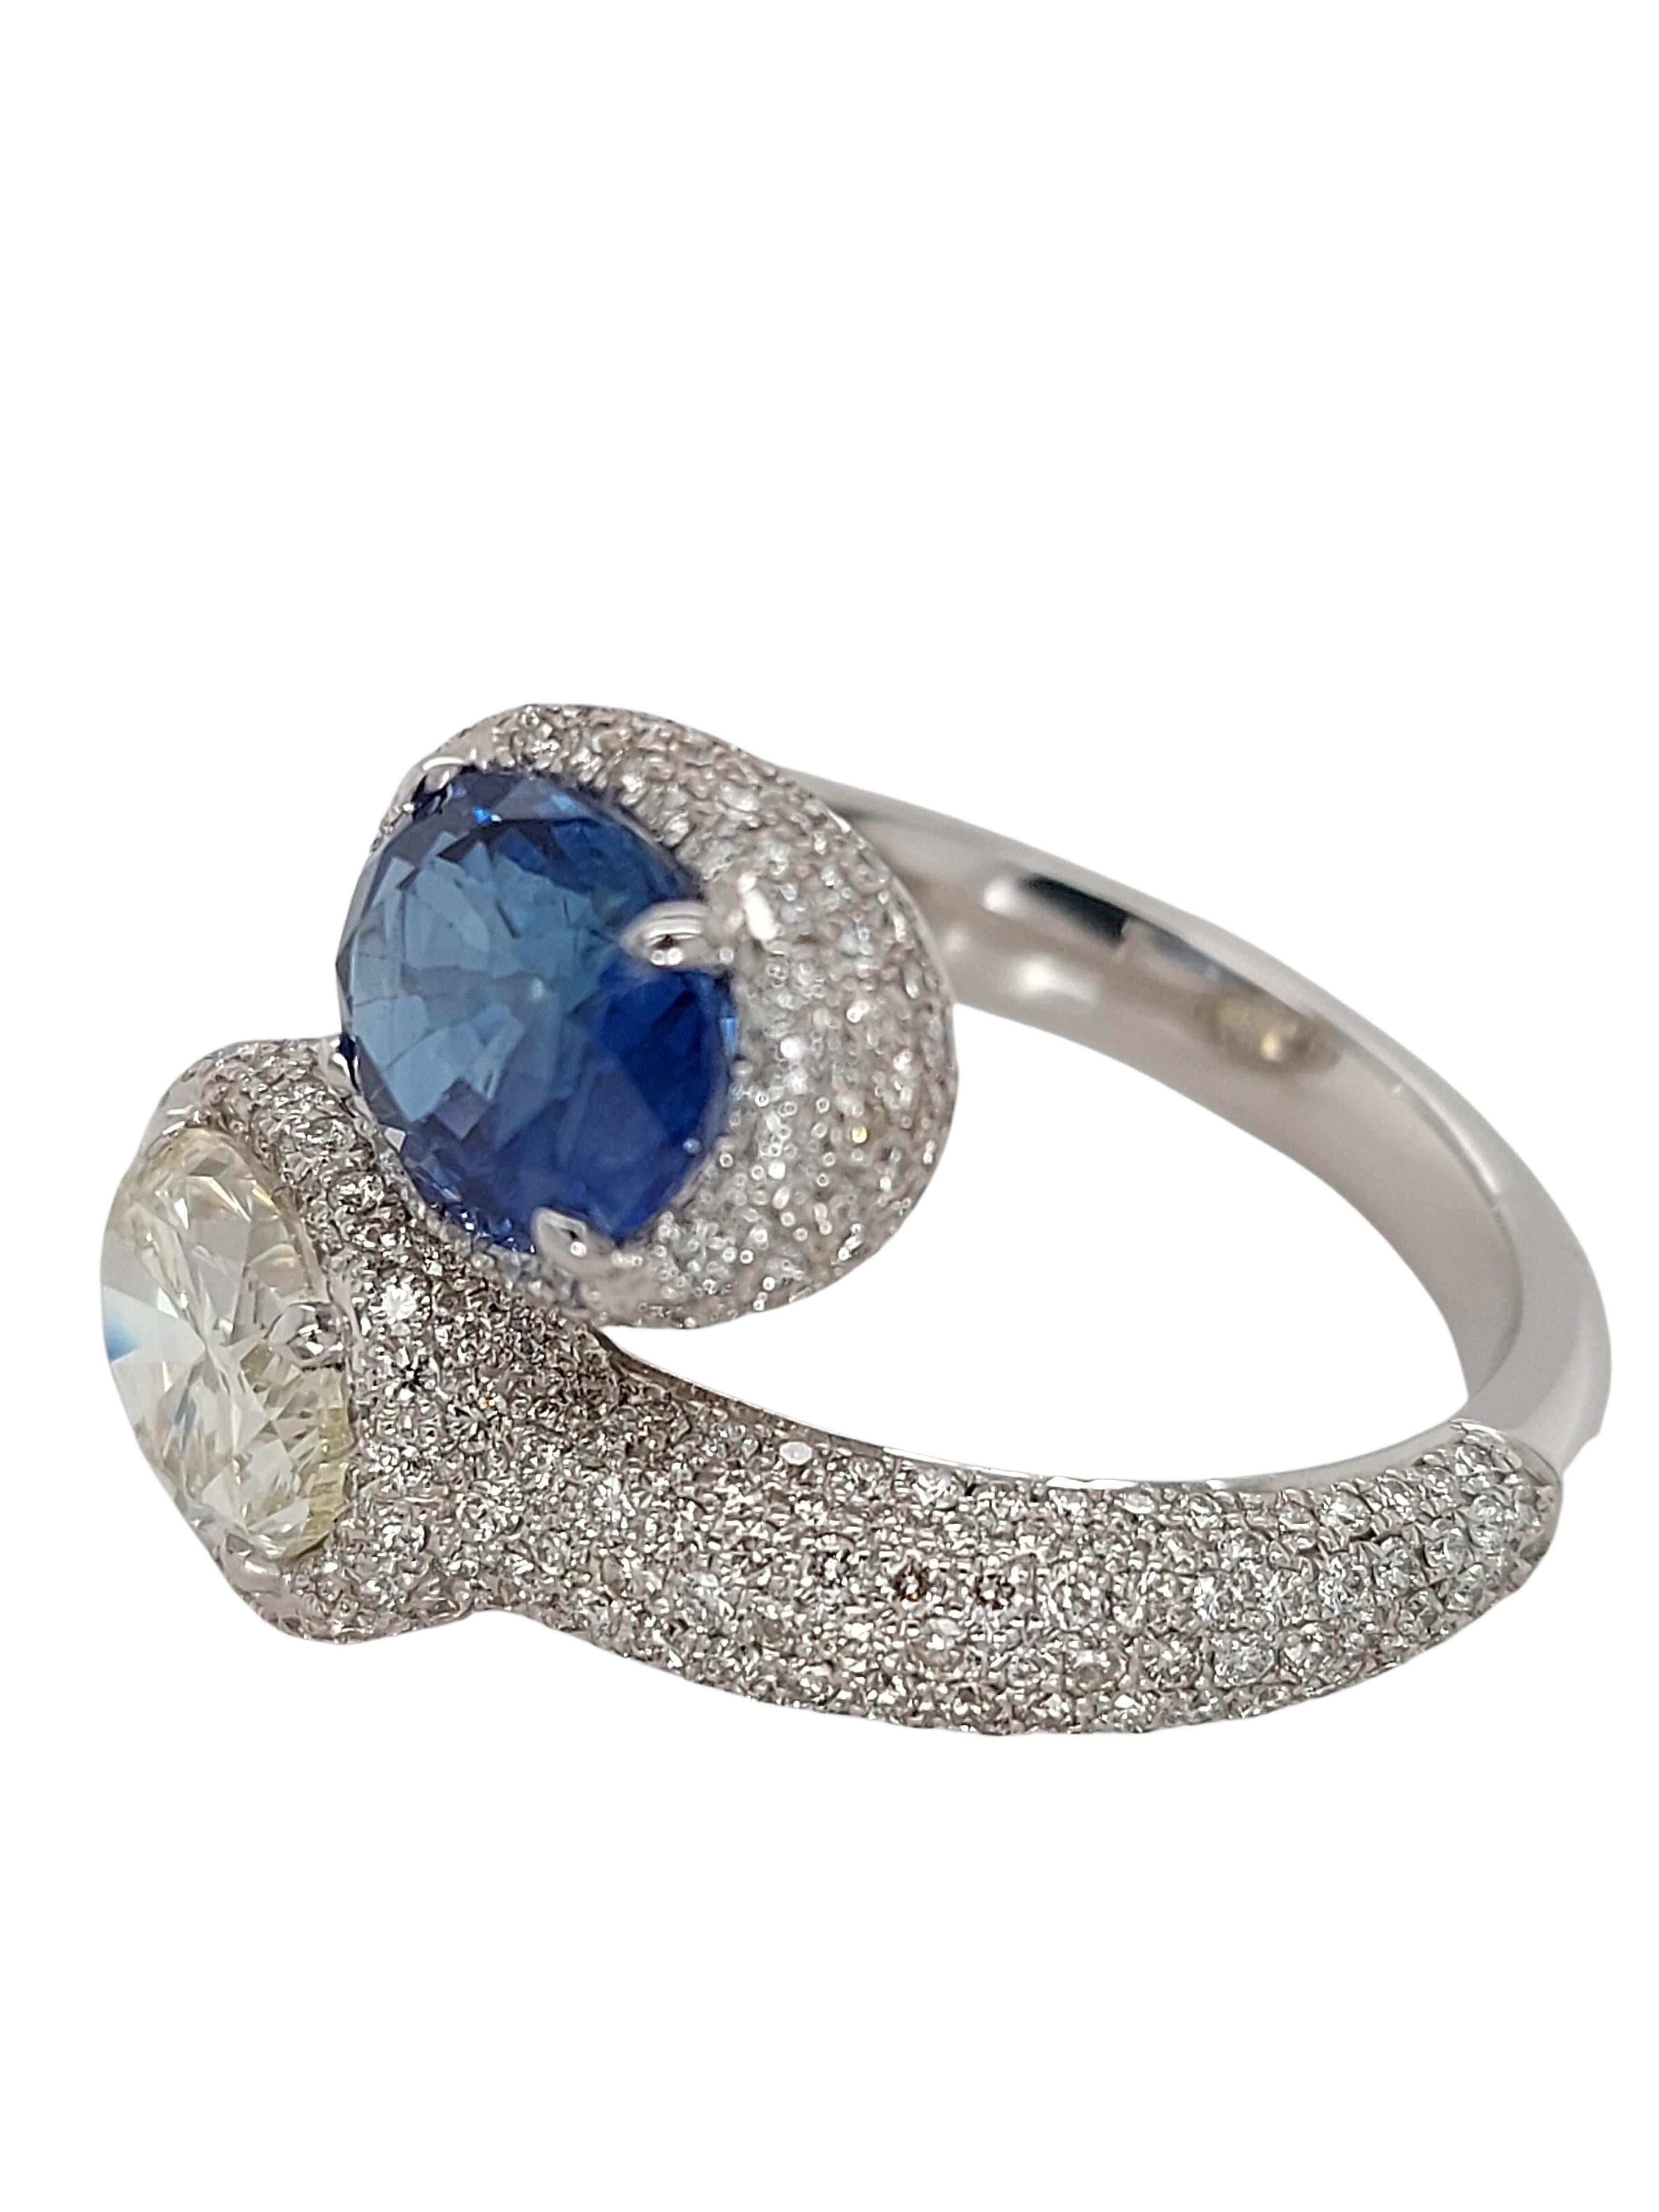 Stunning Toi et Moi 18kt White Gold Ring with a 2.63 Carat Sapphire, 1.67 Carat  For Sale 5